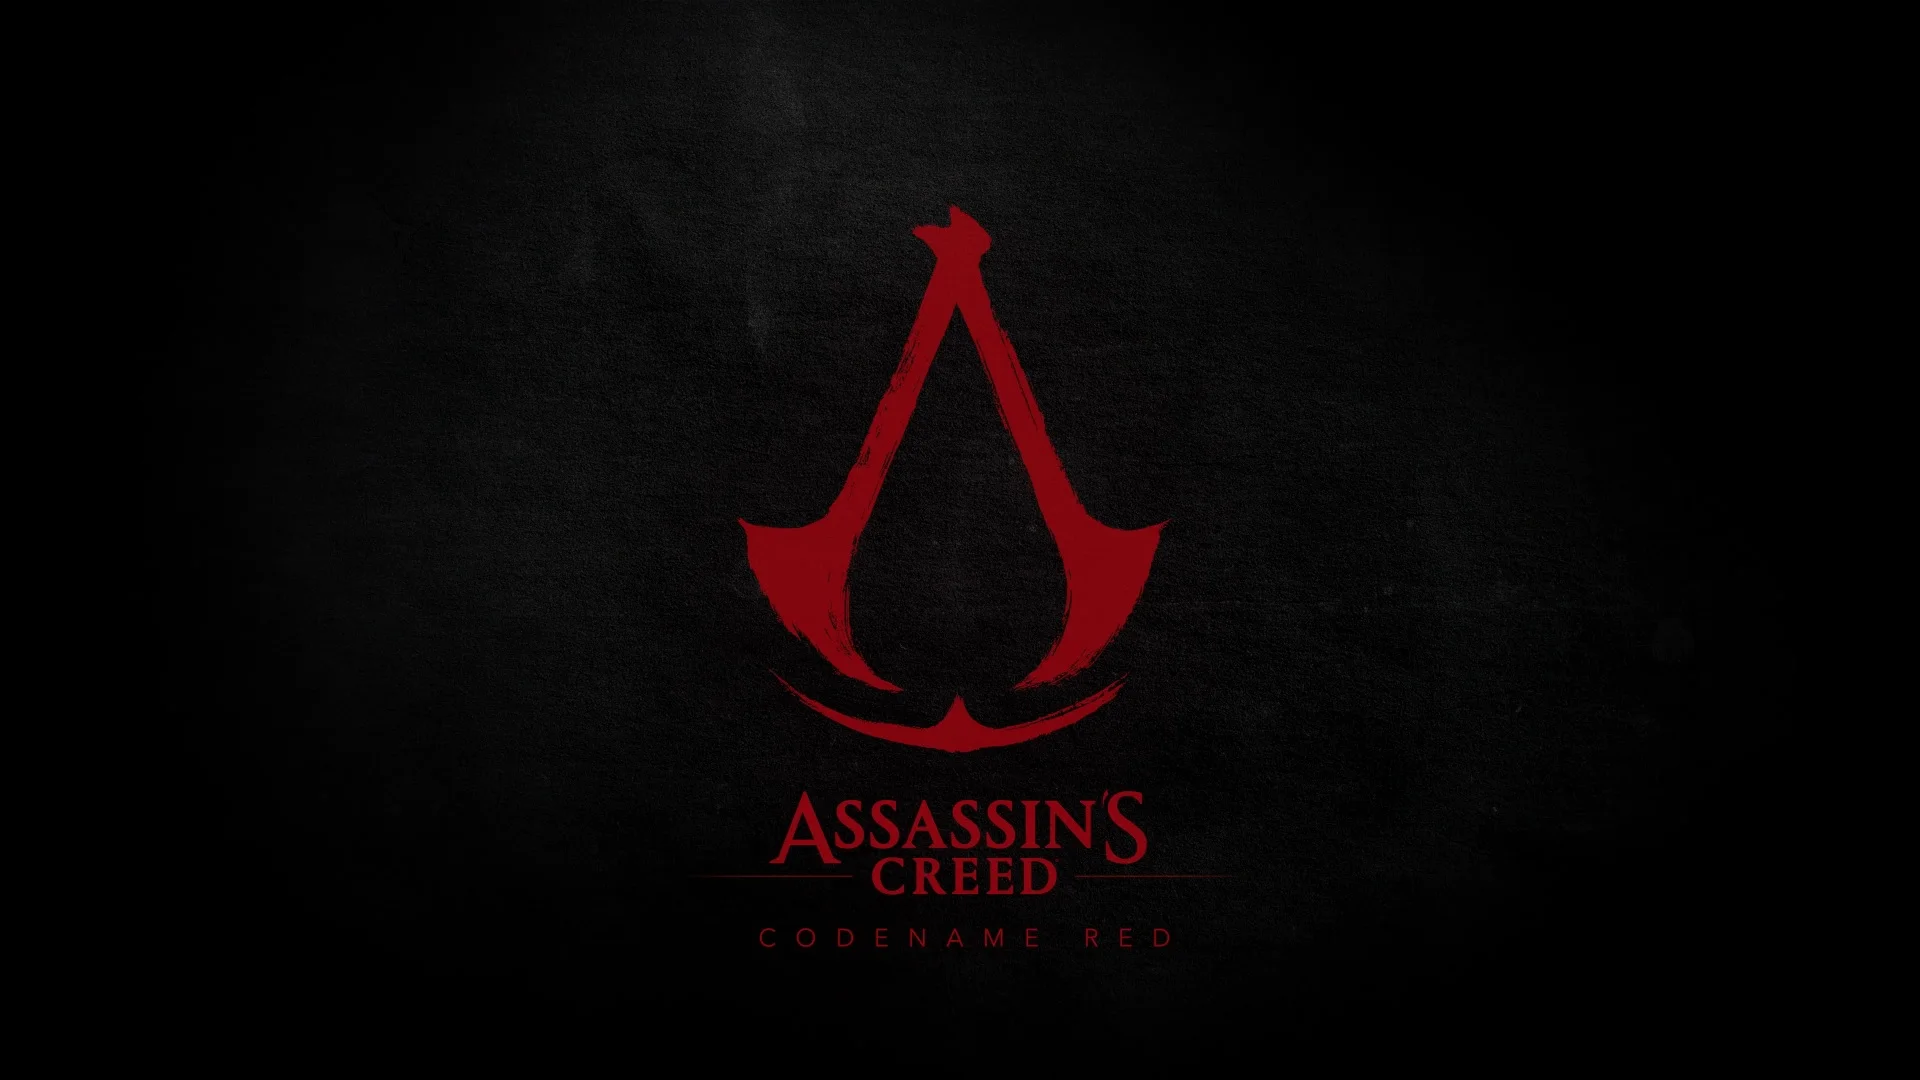 An insider said when the gameplay of the new Assassin's Creed will be shown